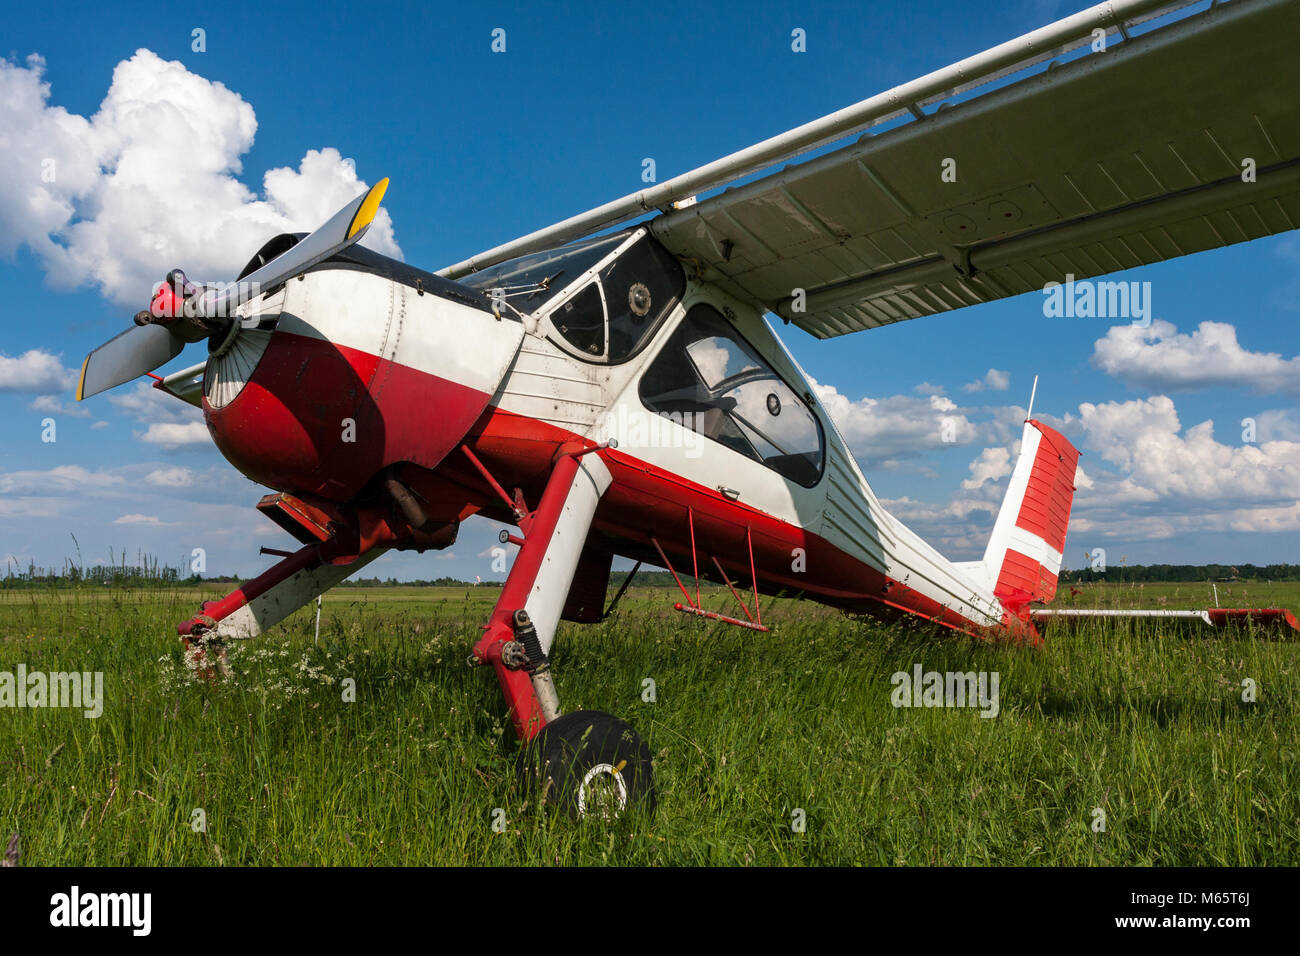 Light sports plane at a small airport Stock Photo